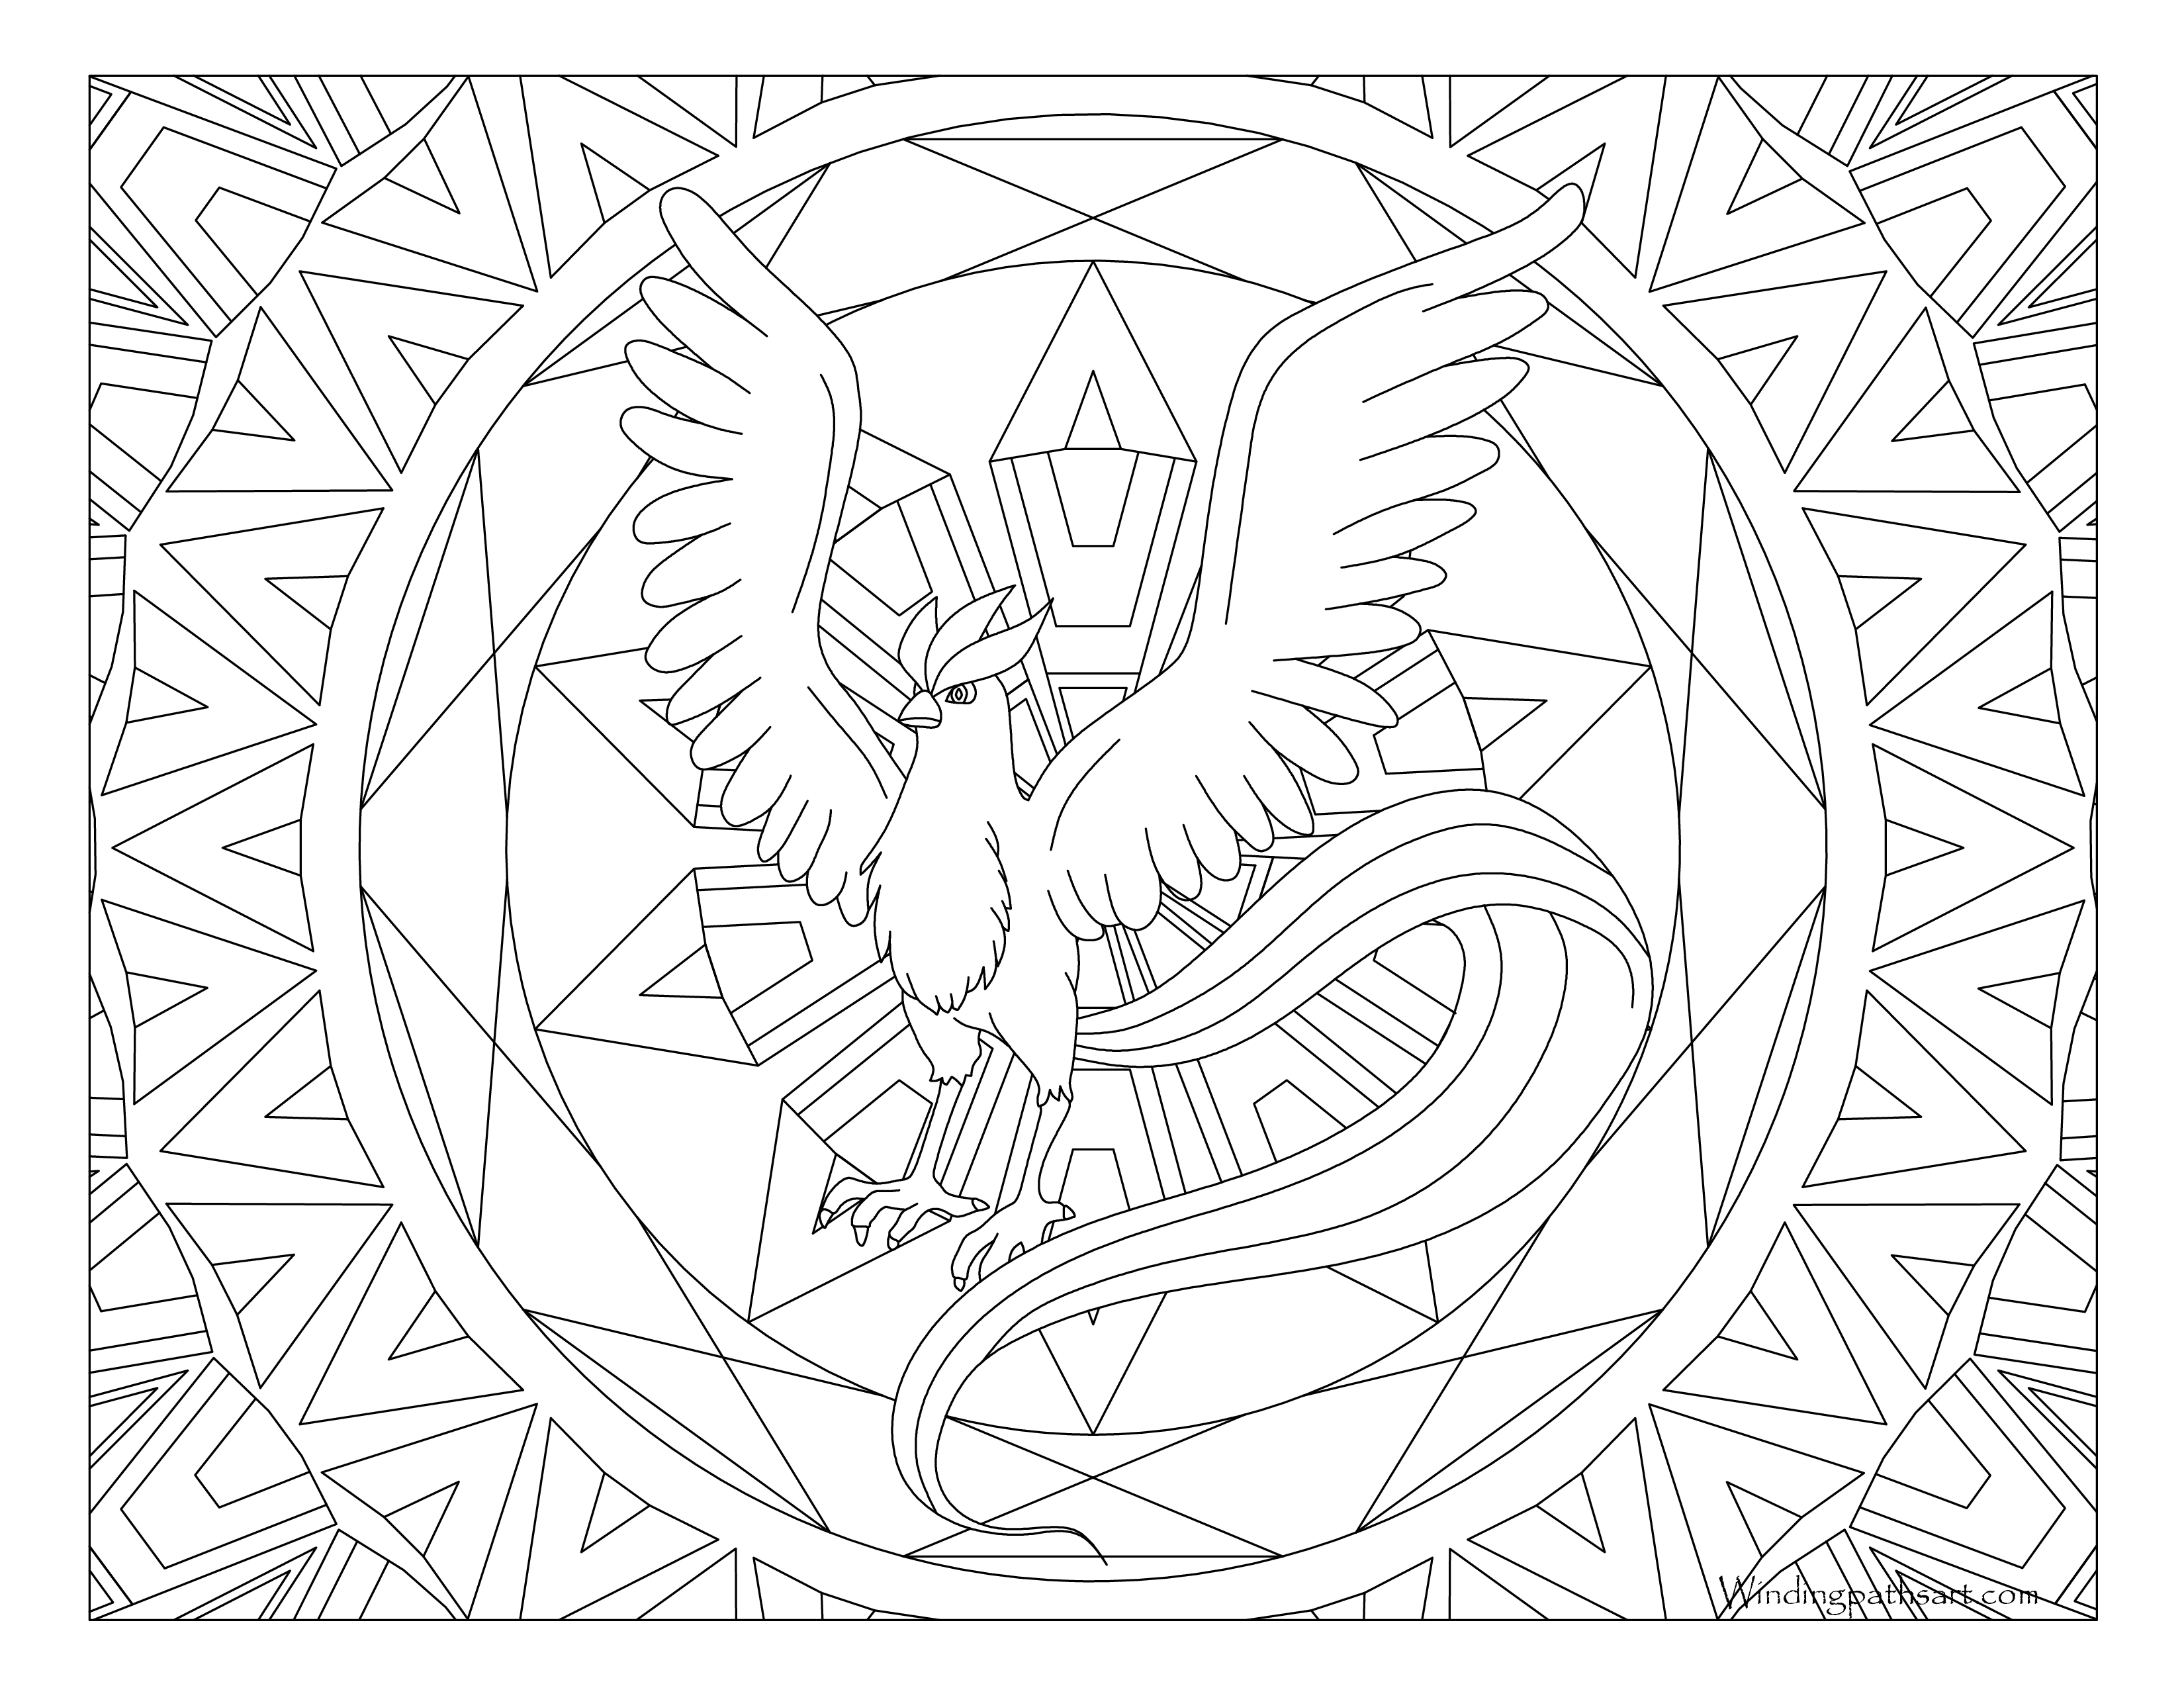 pokemon black and white legendary pokemon coloring pages